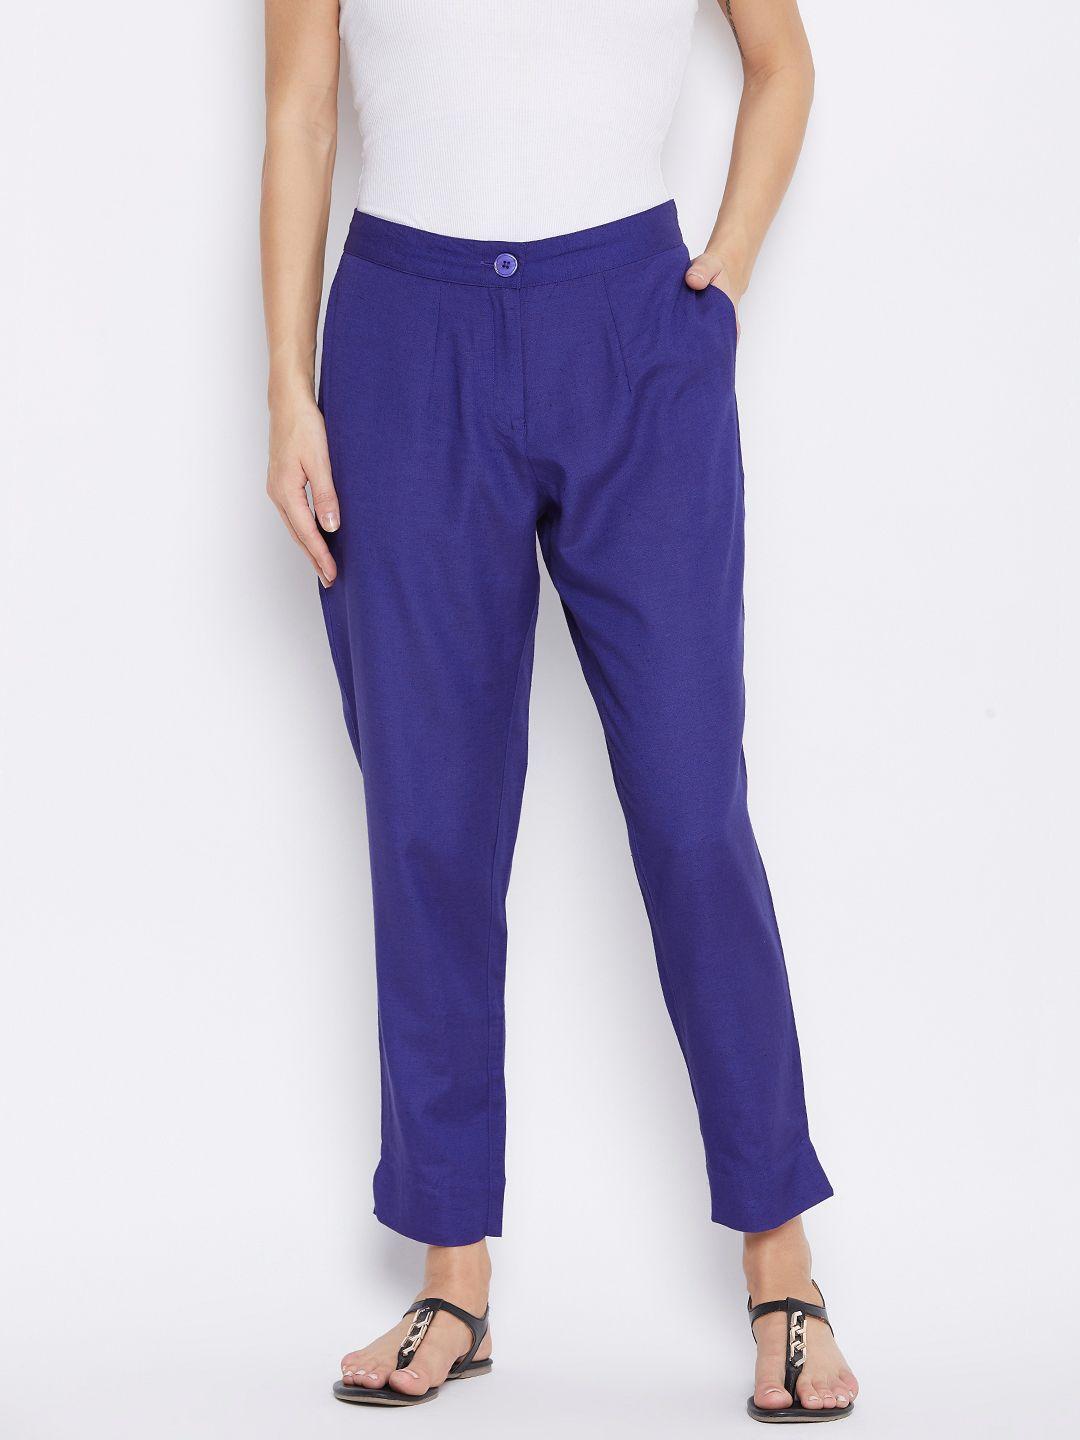 fabglobal women purple relaxed slim fit solid regular trousers